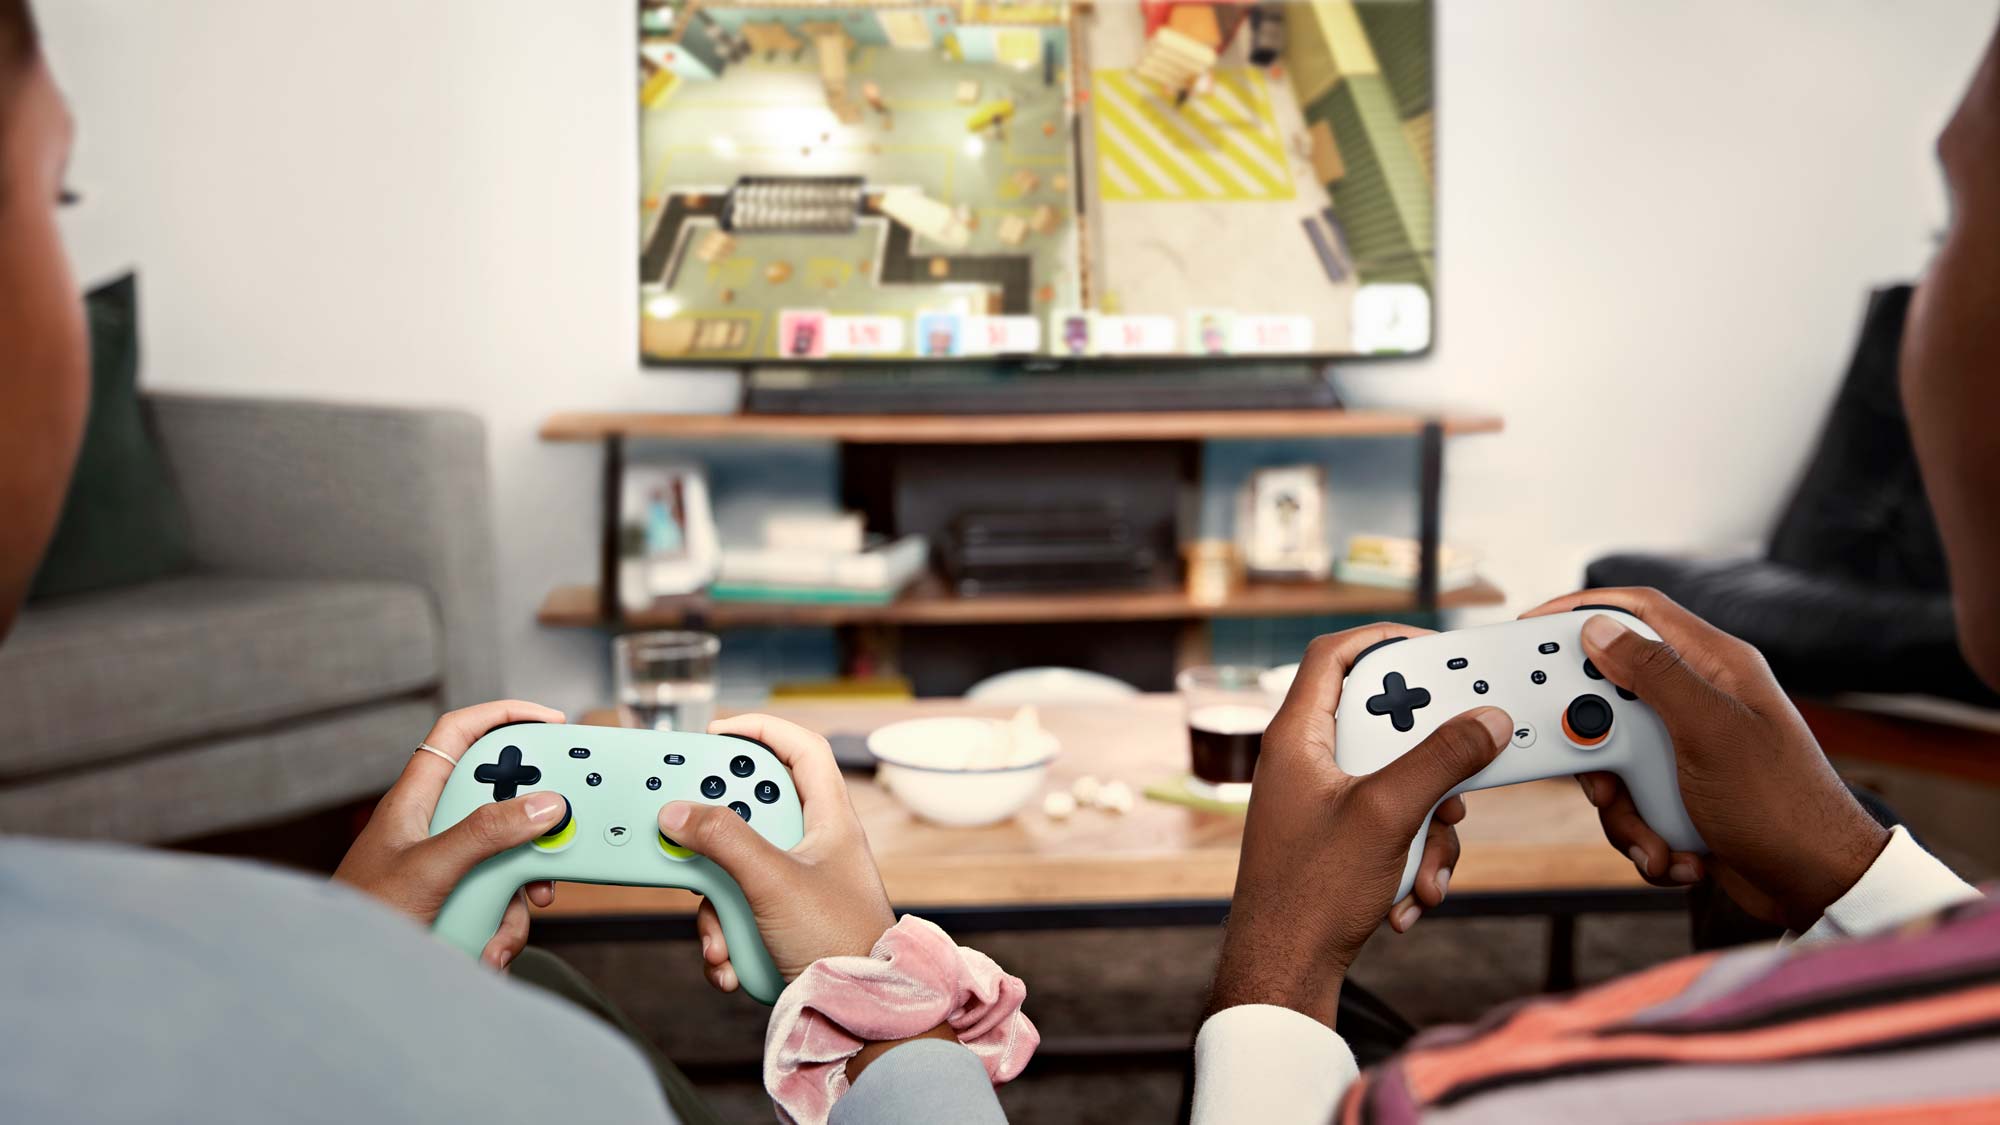 After Google Stadia shutdown, what's the future of cloud gaming?